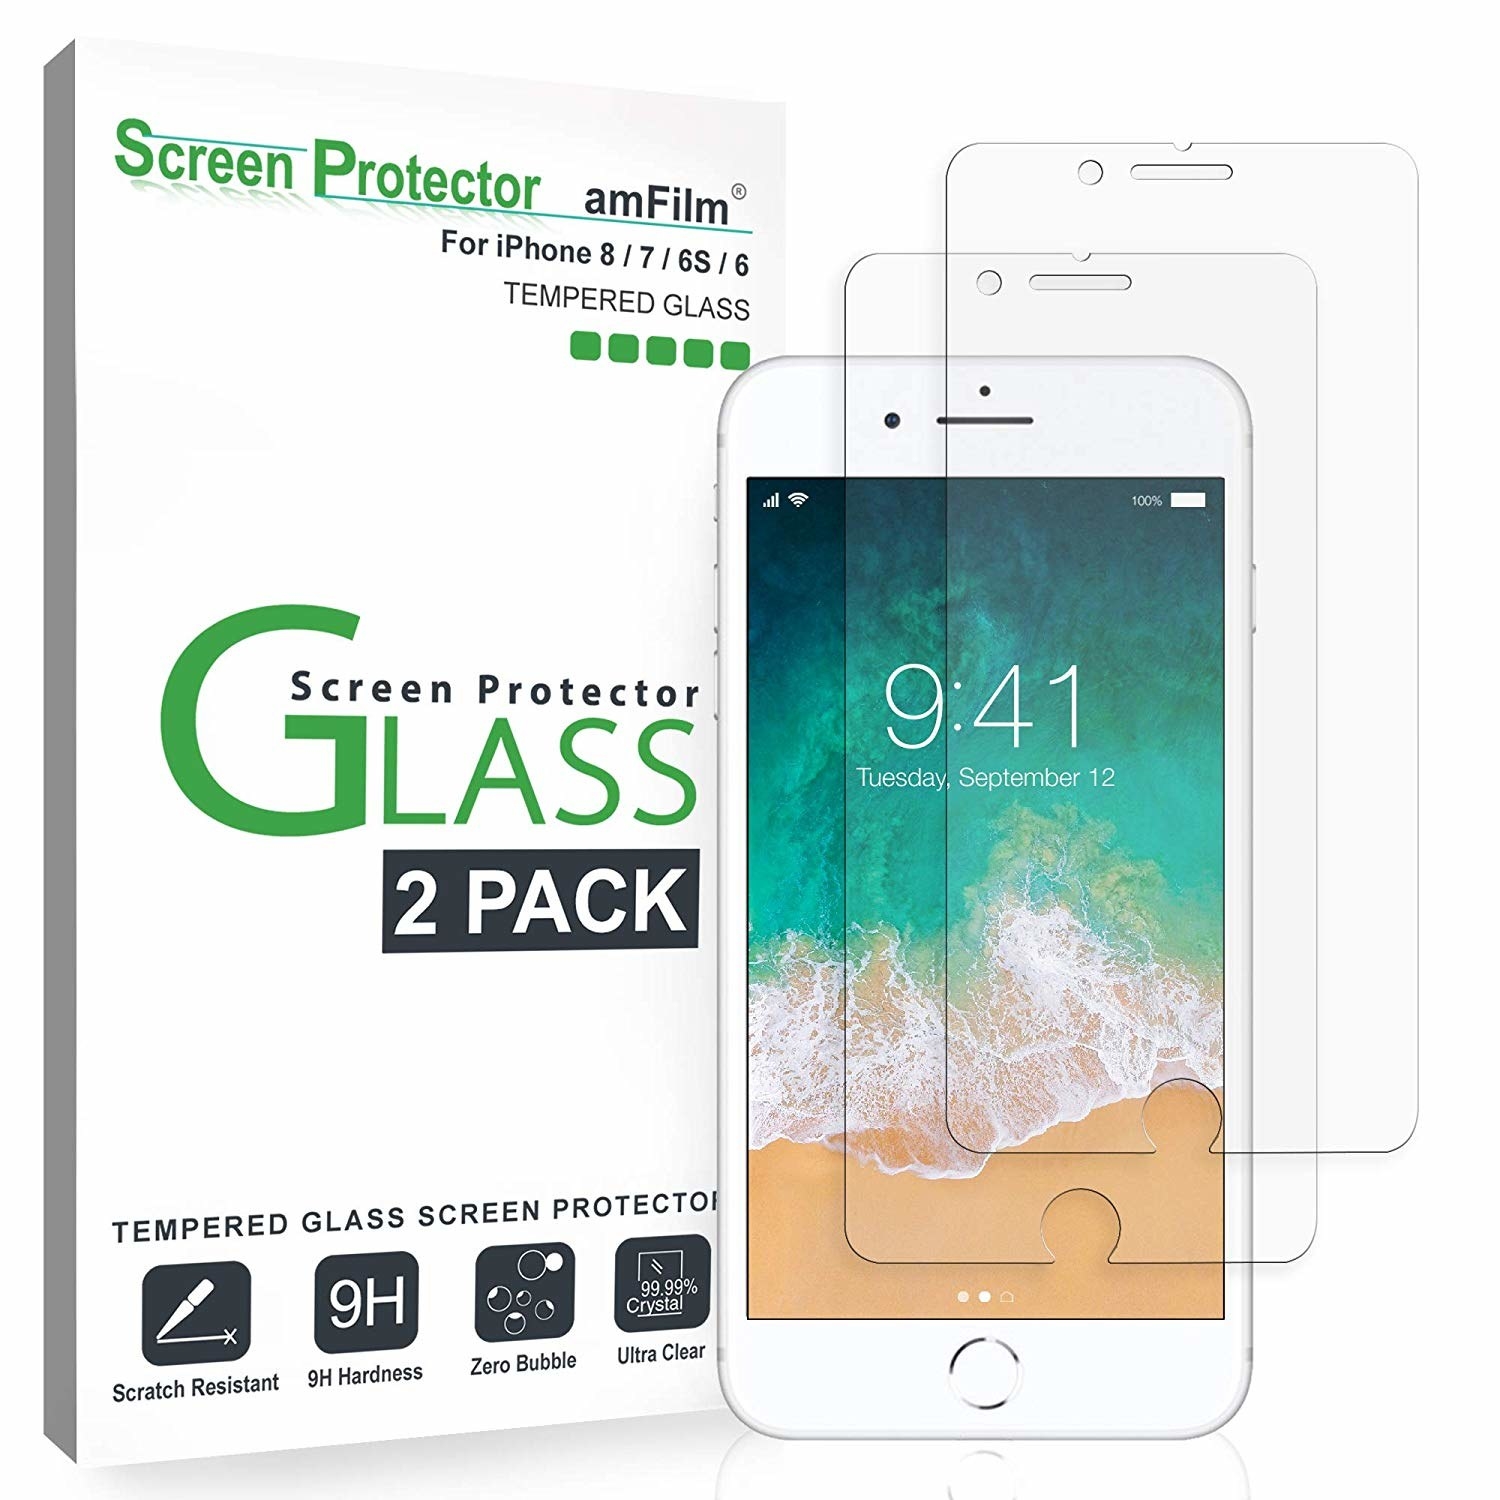 A set of two glass screen protectors placed on top of a phone